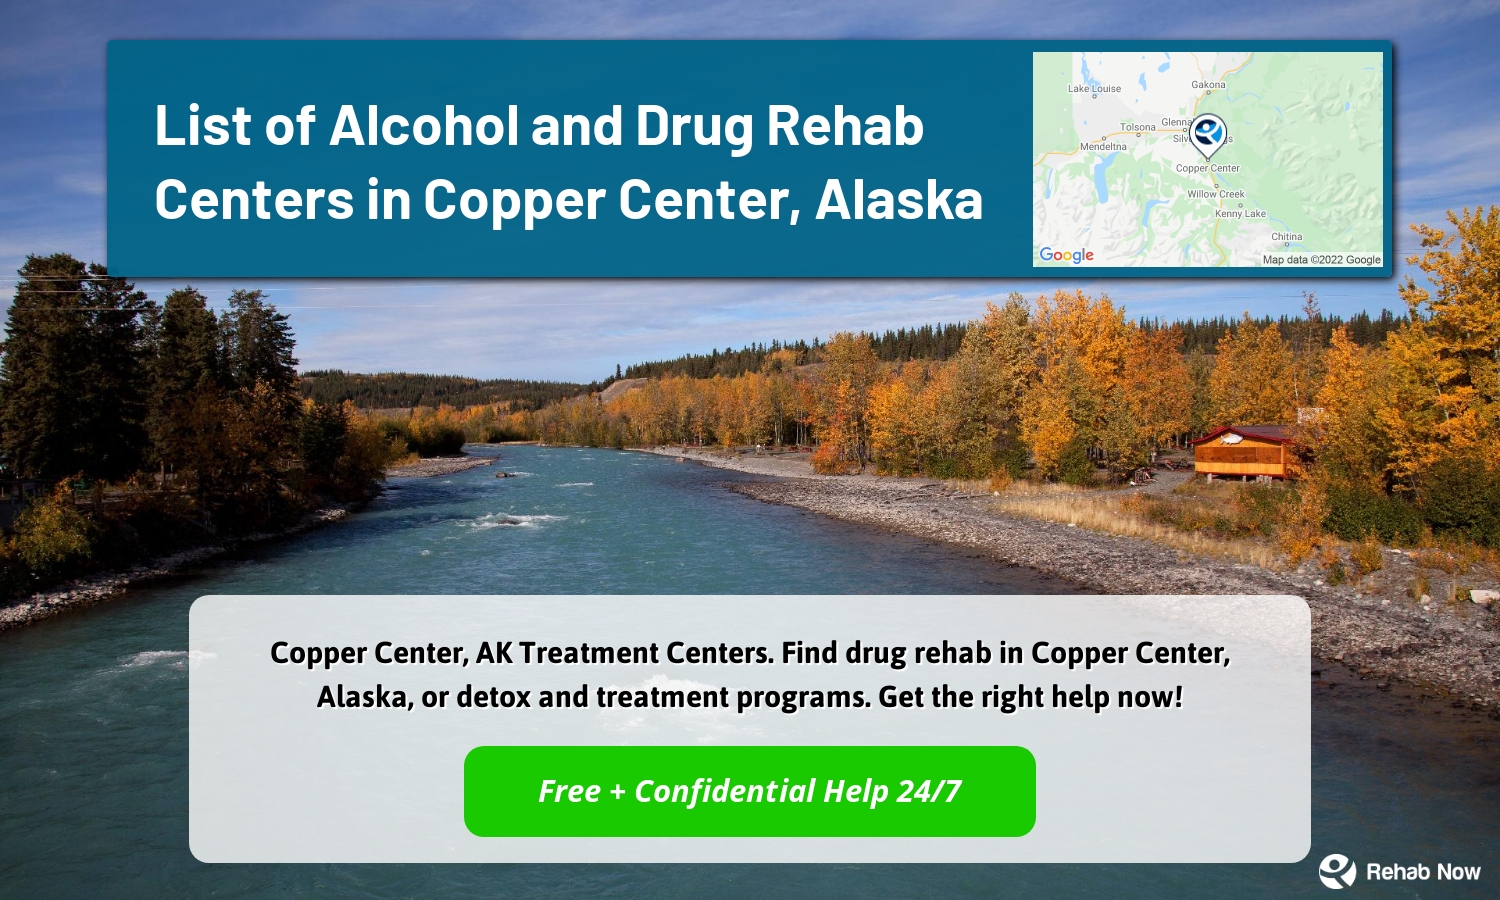 Copper Center, AK Treatment Centers. Find drug rehab in Copper Center, Alaska, or detox and treatment programs. Get the right help now!